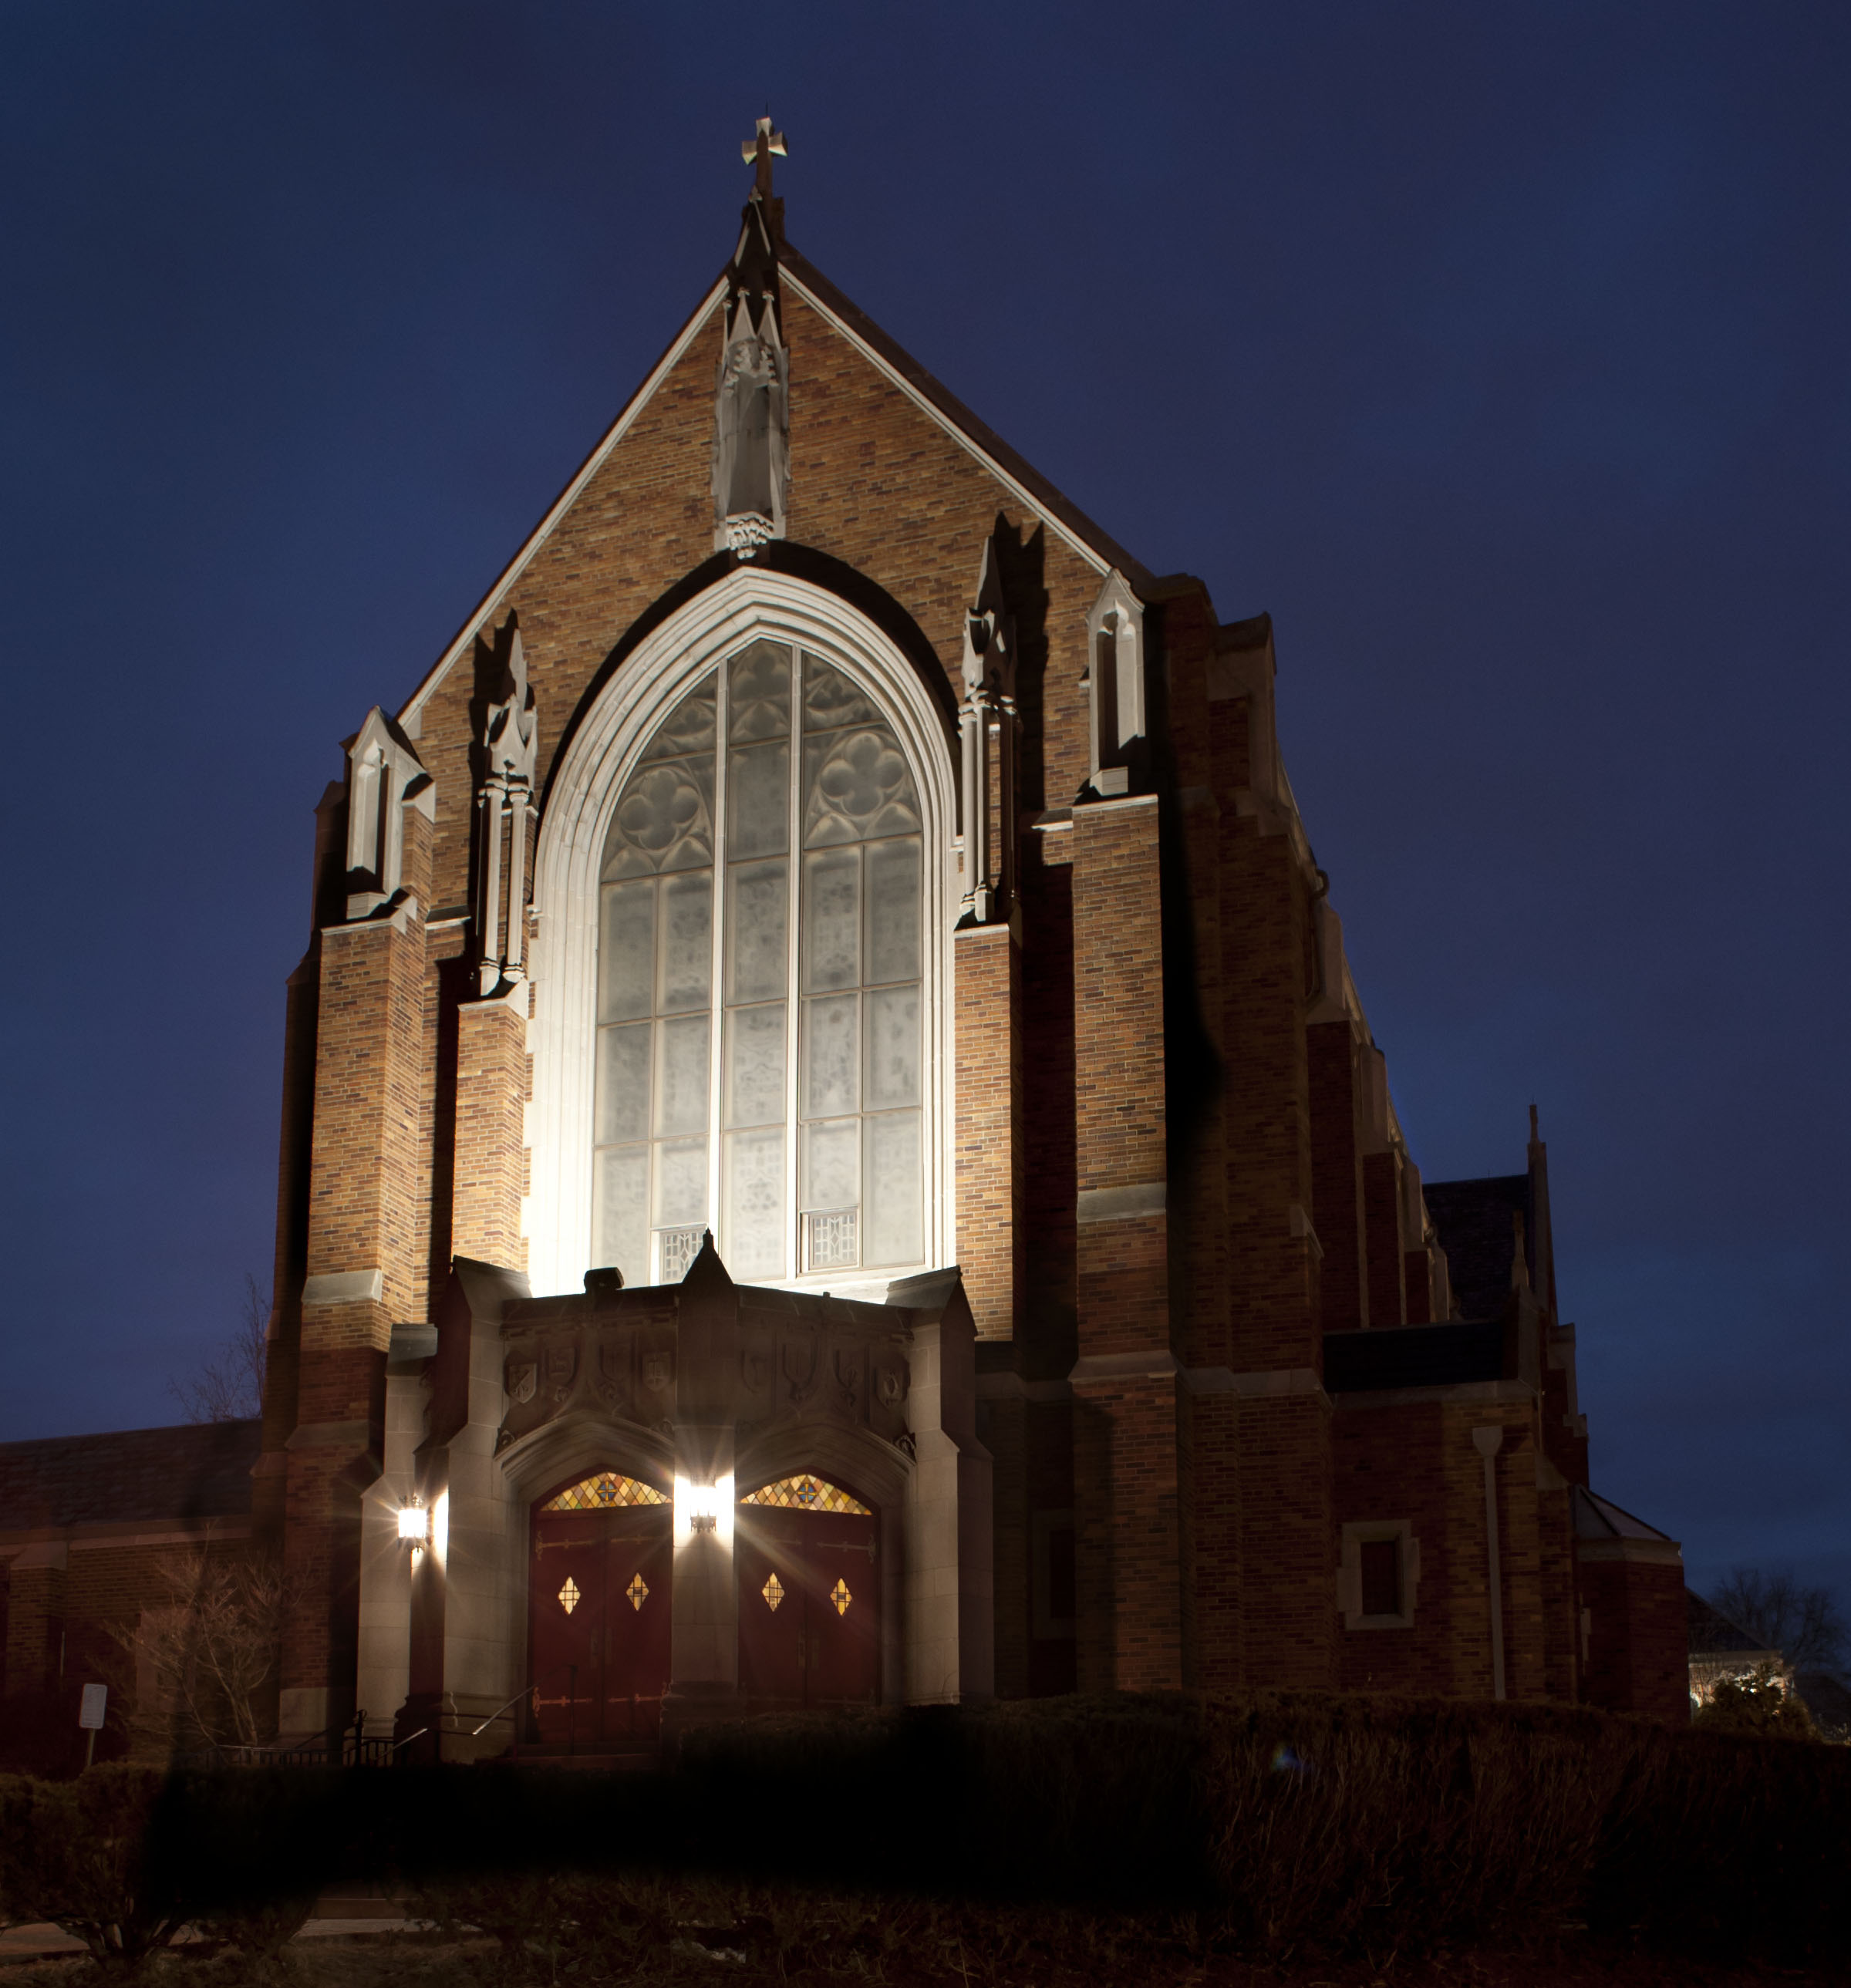 Front of the church at night